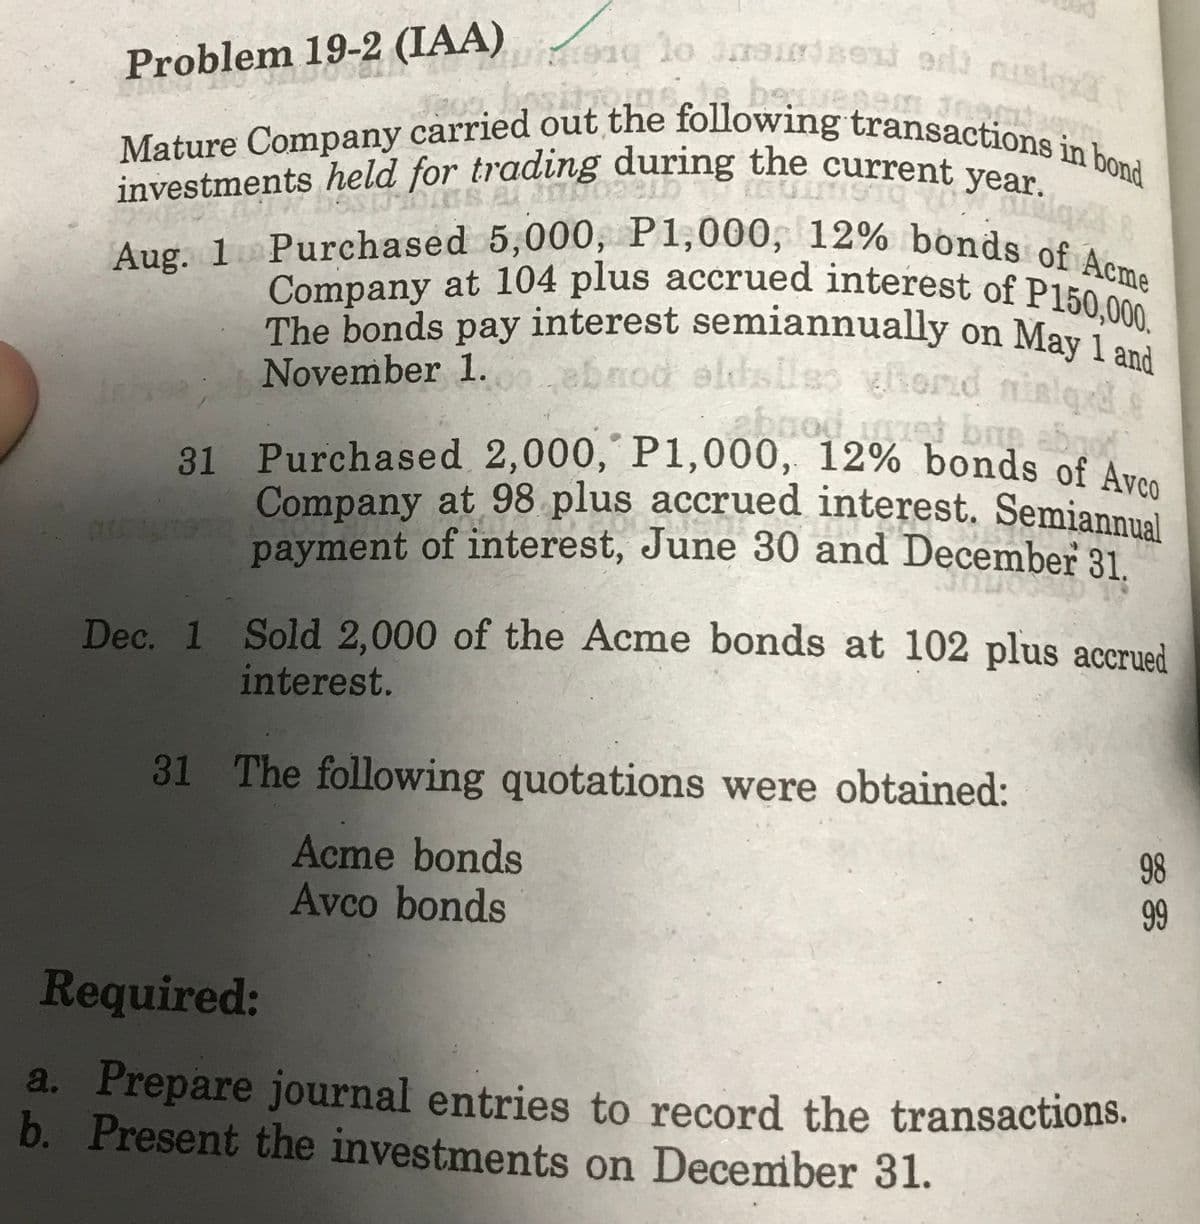 becuesam nomin
Problem 19-2 (IAA) to index odt nisl
Mature Company carried out the following transactions in bond
sitions
Milqxl
investments held for trading during the current year.
Aug. 1Purchased 5,000, P1,000, 12% bonds of Acme
The bonds pay interest semiannually on May 1 and
November 1.00..ebnod eldslles hond nielq
abnod
met baş abood
31 Purchased 2,000, P1,000, 12% bonds of Avco
Company at 98 plus accrued interest. Semiannual
payment of interest, June 30 and December 31.
313
Dec. 1 Sold 2,000 of the Acme bonds at 102 plus accrued
interest.
31 The following quotations were obtained:
Acme bonds
Avco bonds
Required:
a. Prepare journal entries to record the transactions.
b. Present the investments on December 31.
98
99